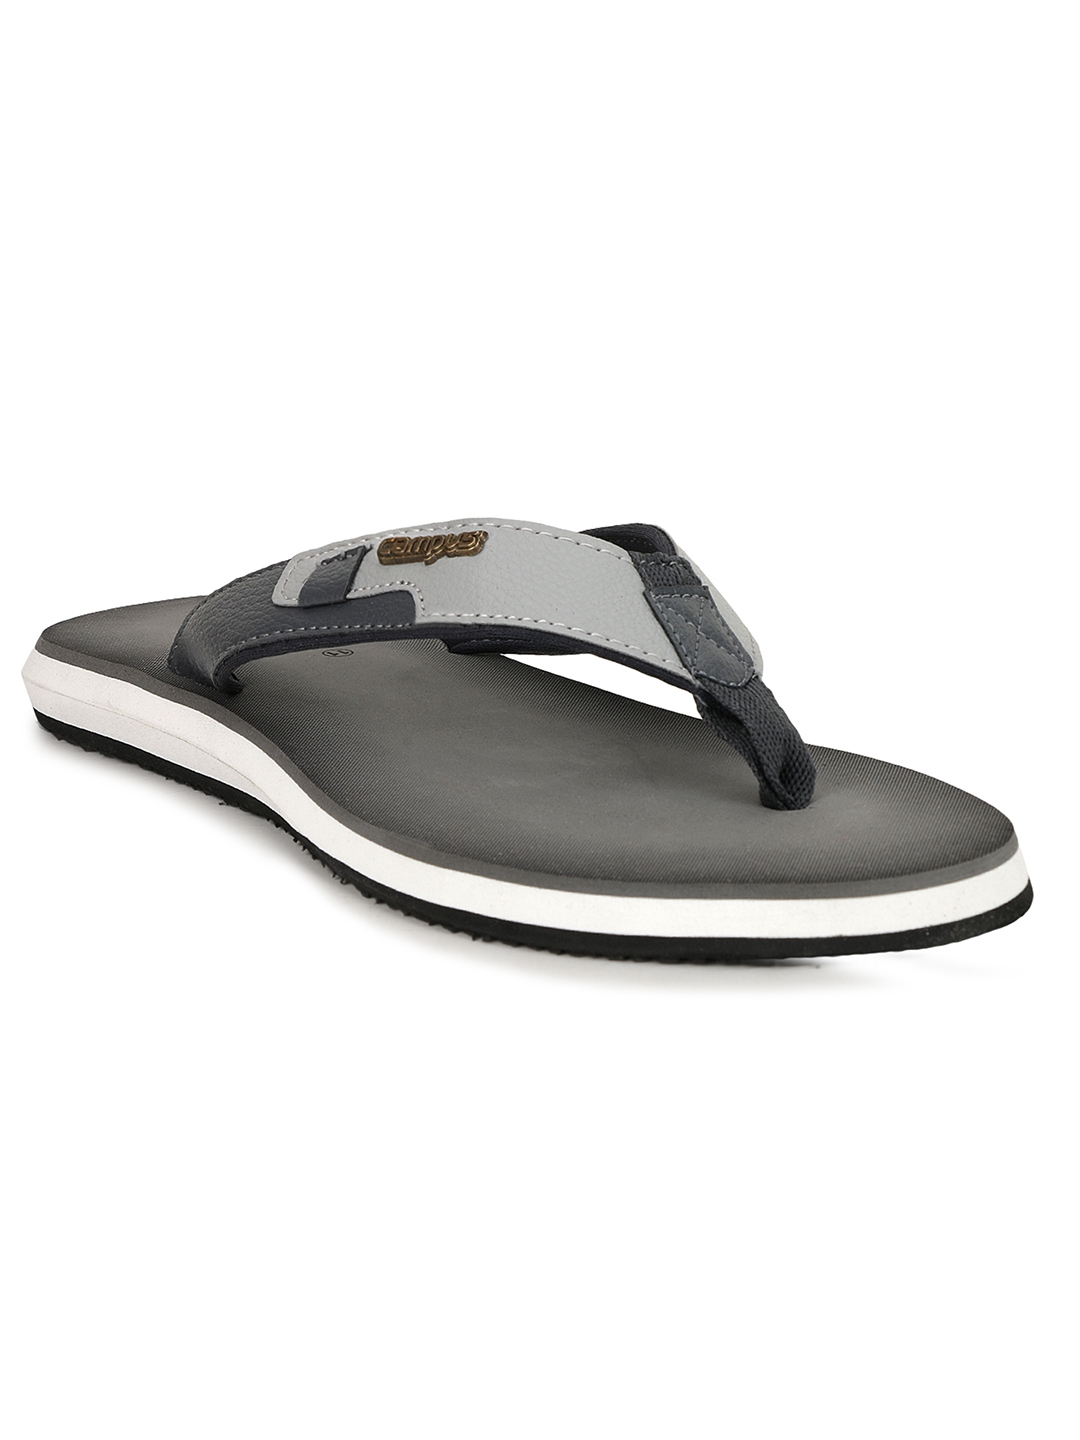 Campus Shoes | Grey Slippers